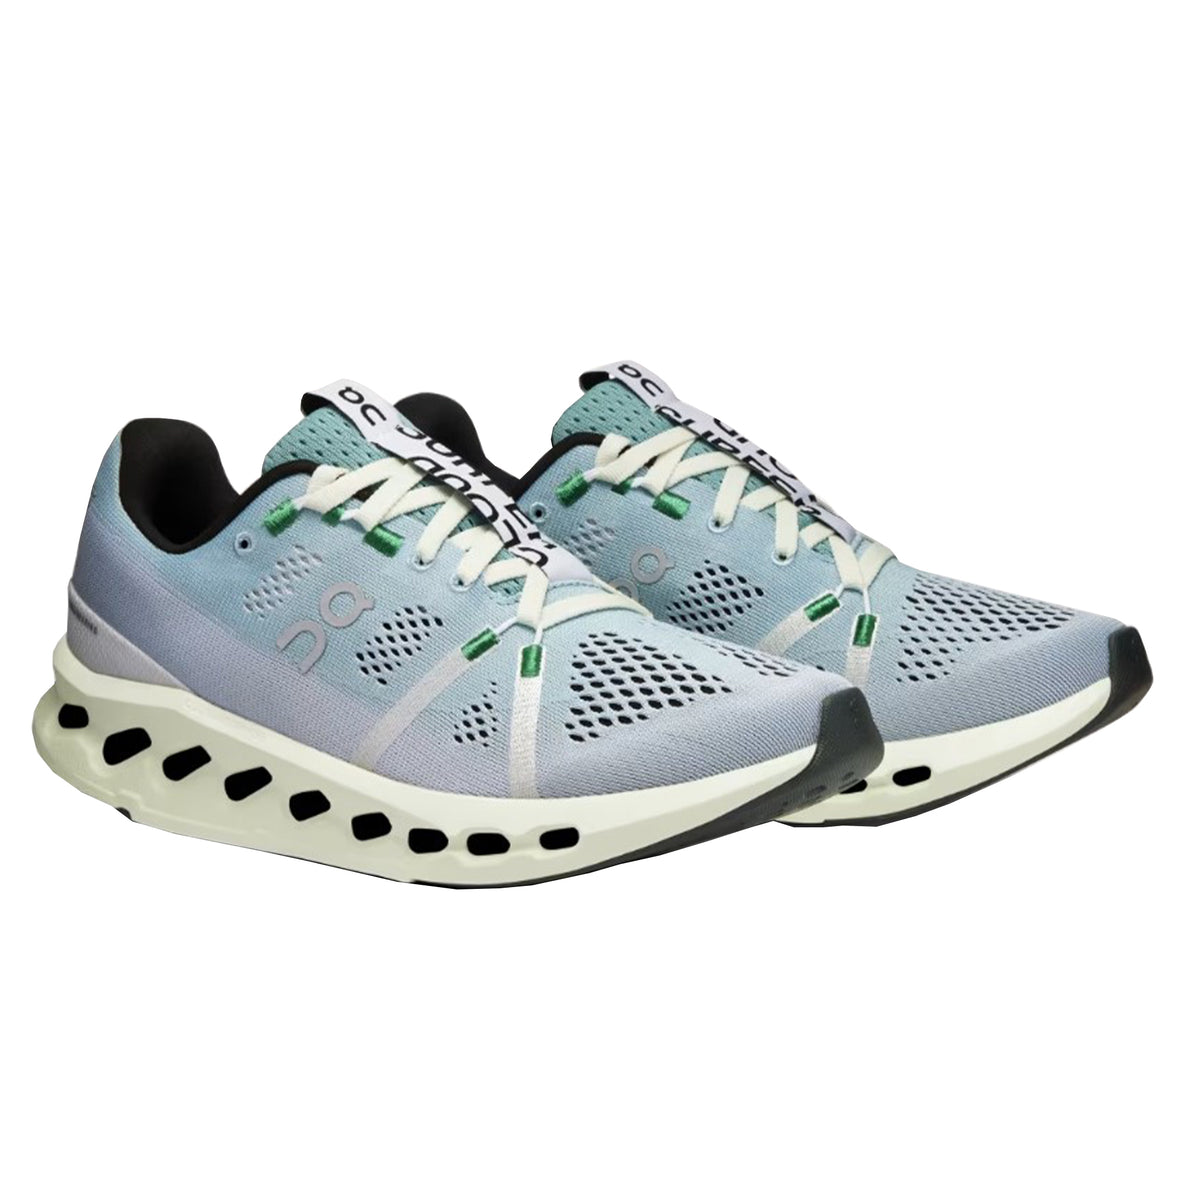 On Cloudsurfer Womens Running Shoes: Mineral/Aloe